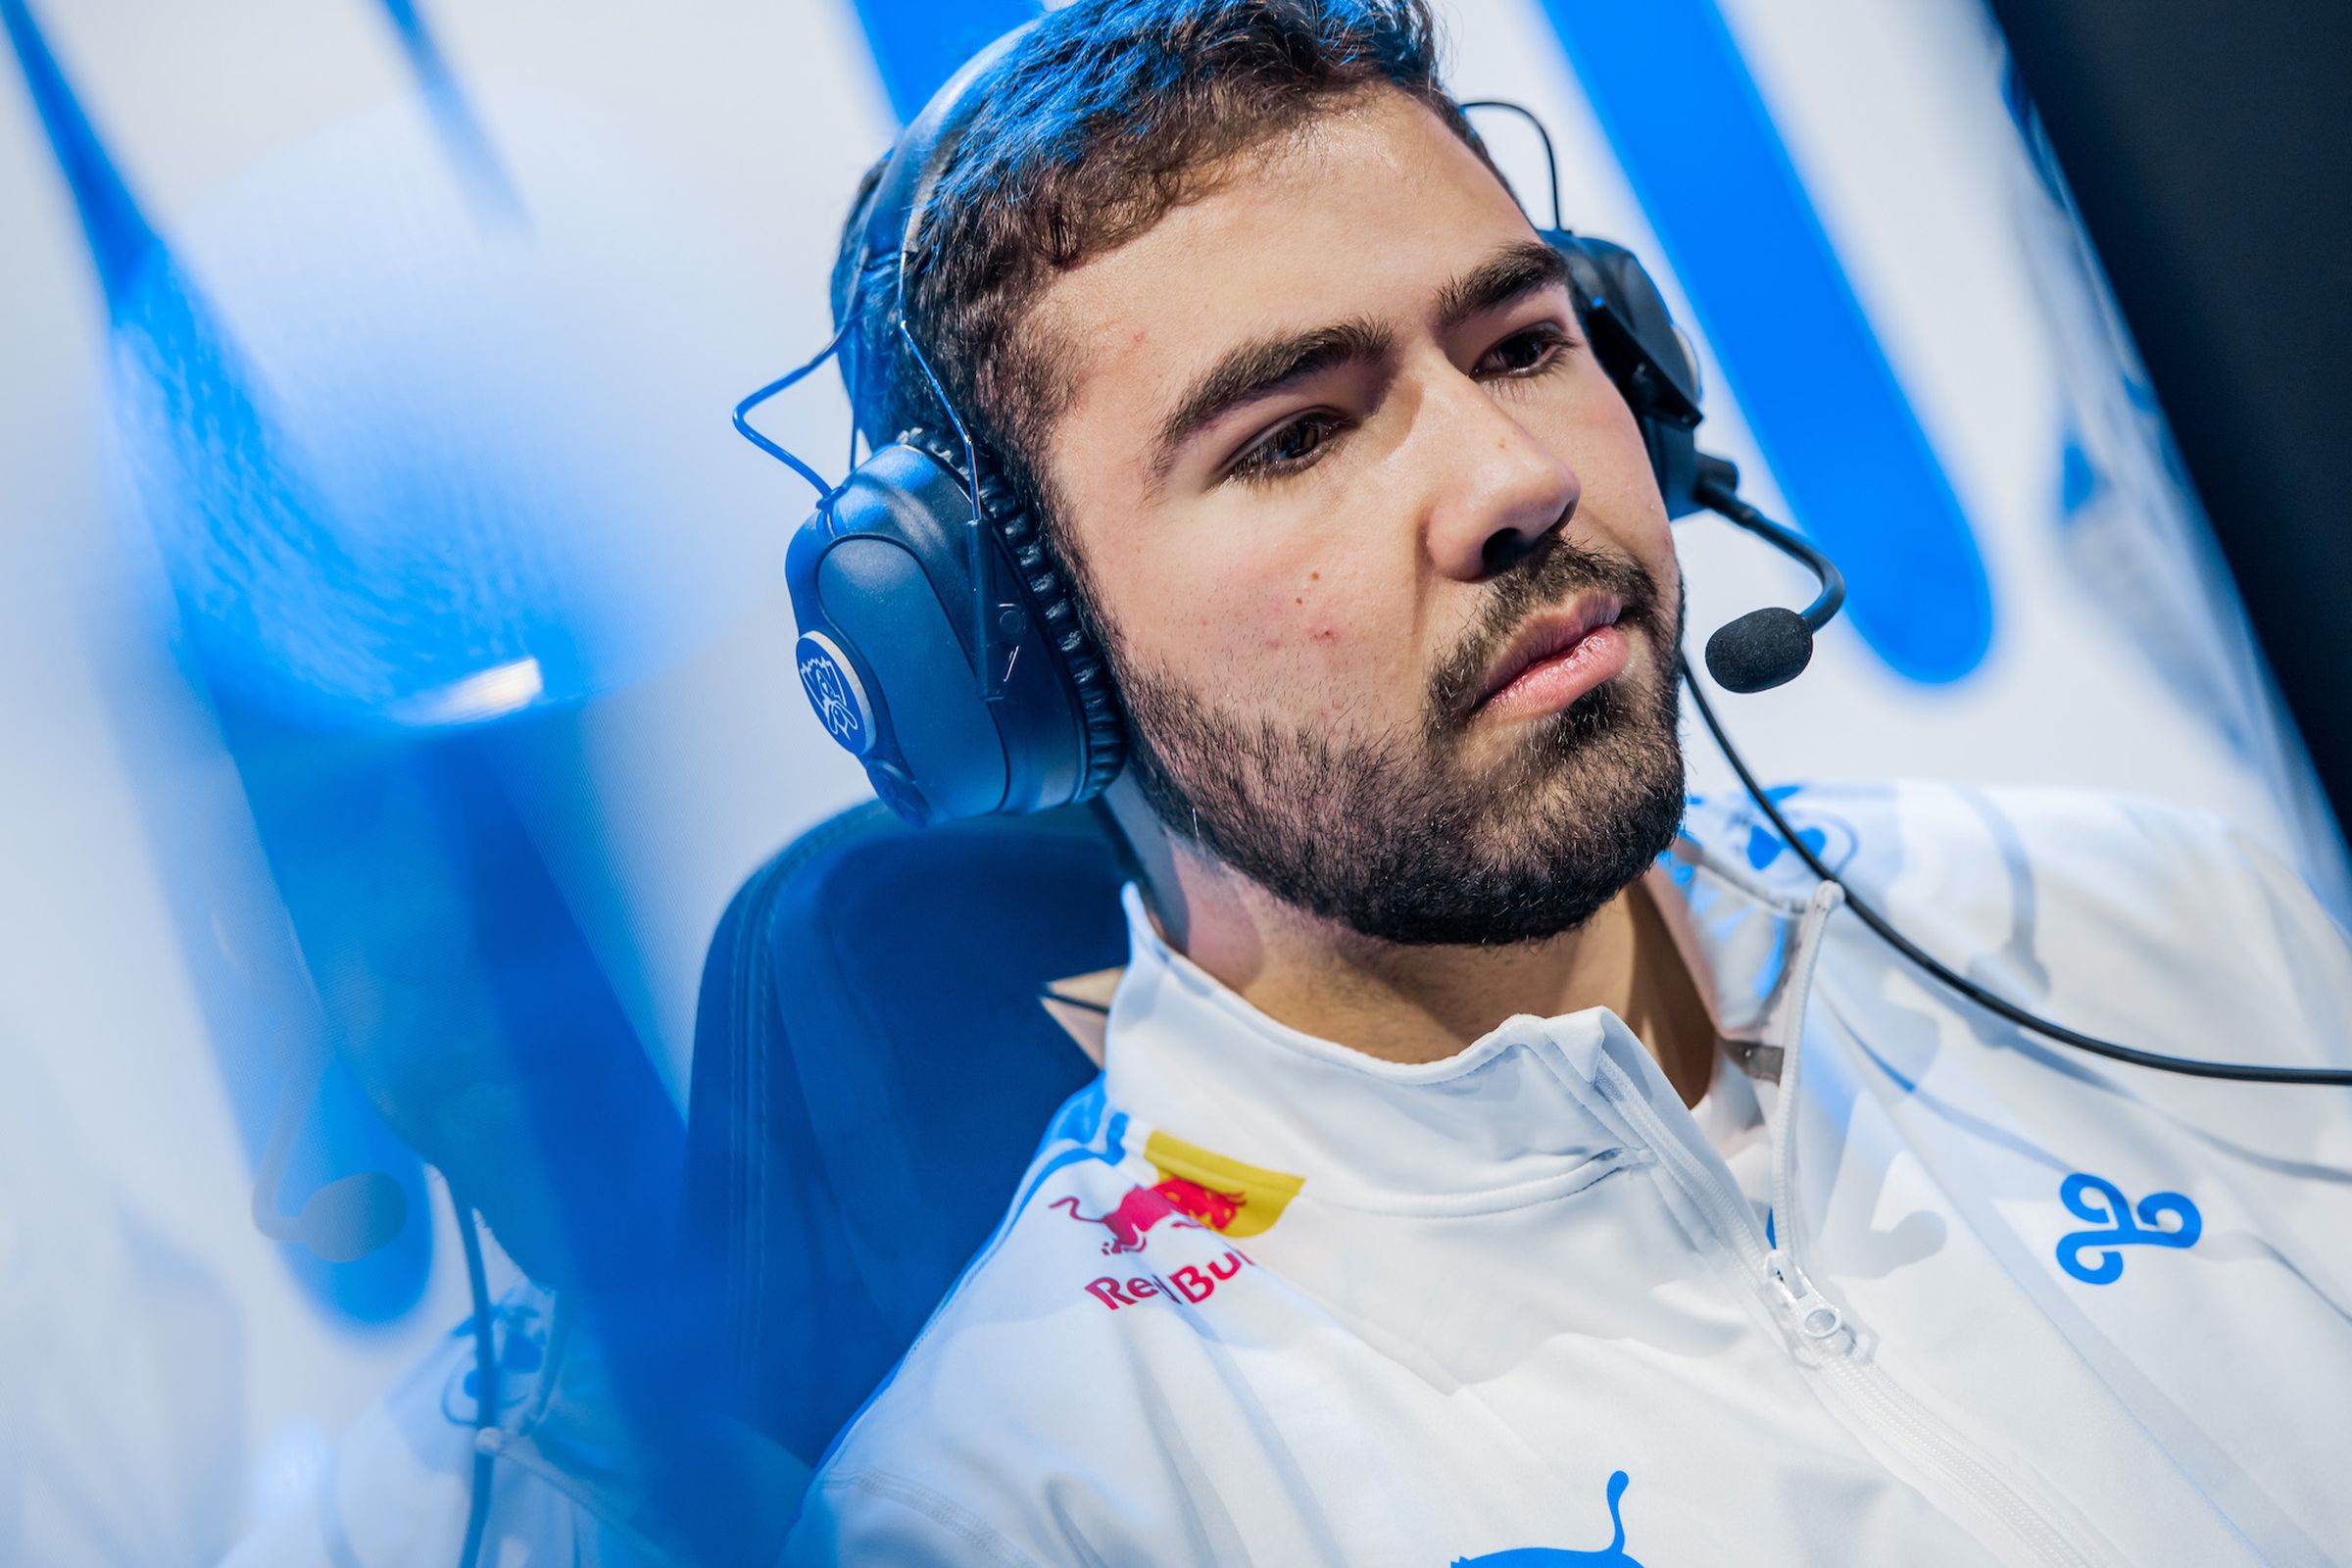 Ibrahim “Fudge” Allami of Cloud9 competes at the League of Legends World Championship Groups Stage on October 8, 2022 in New York City.